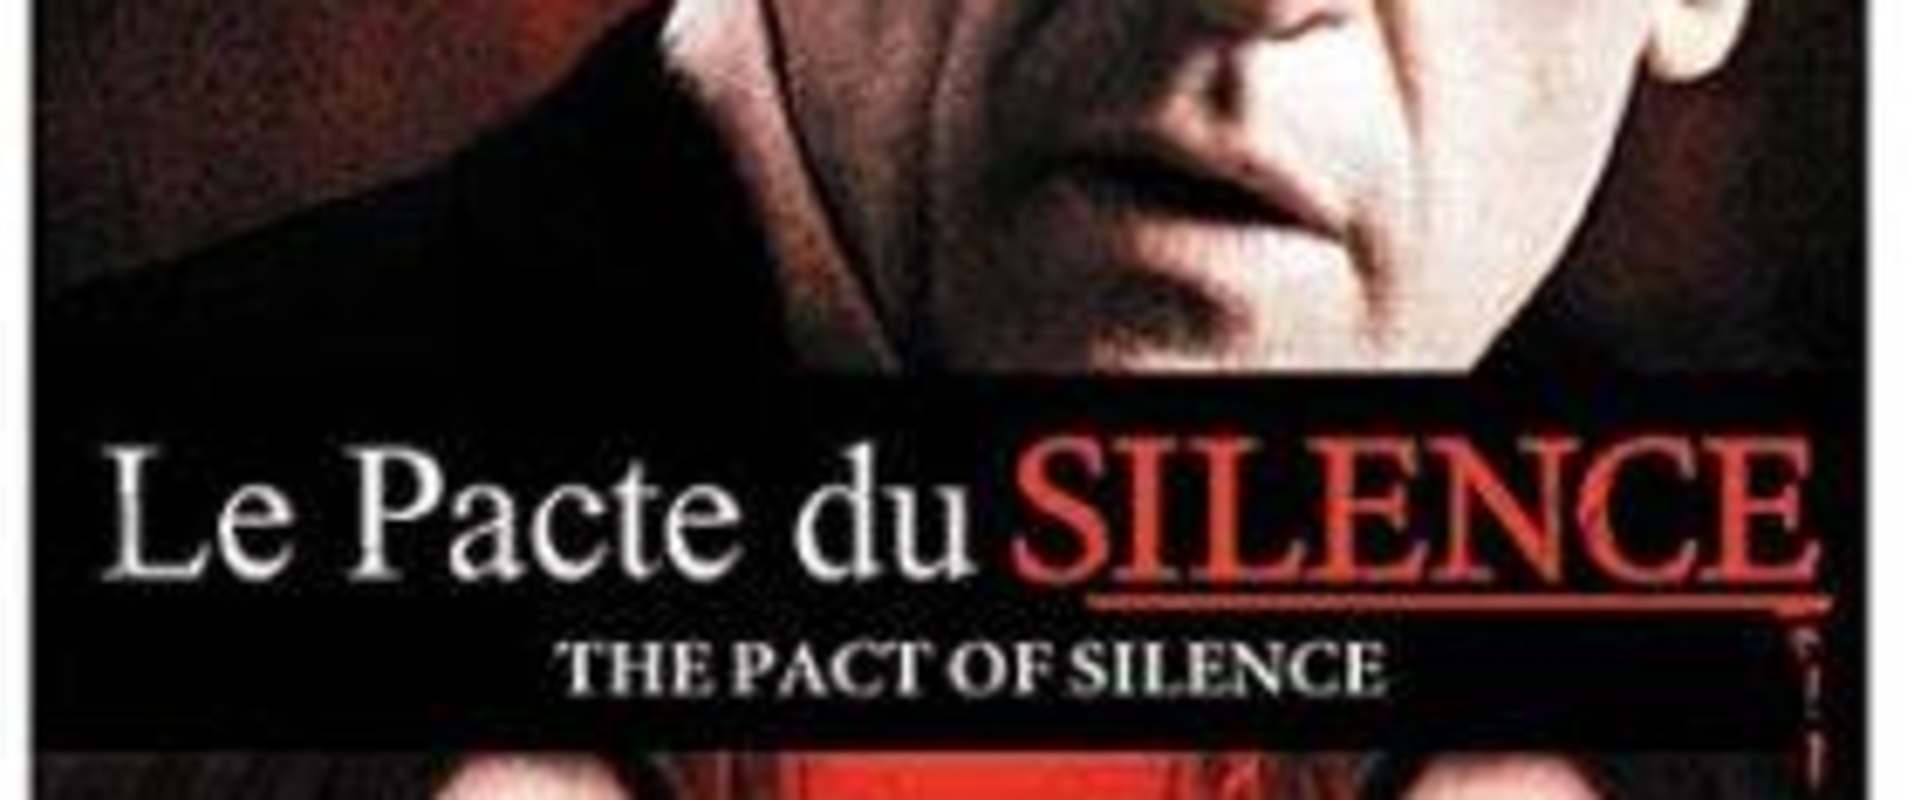 The Pact of Silence background 1